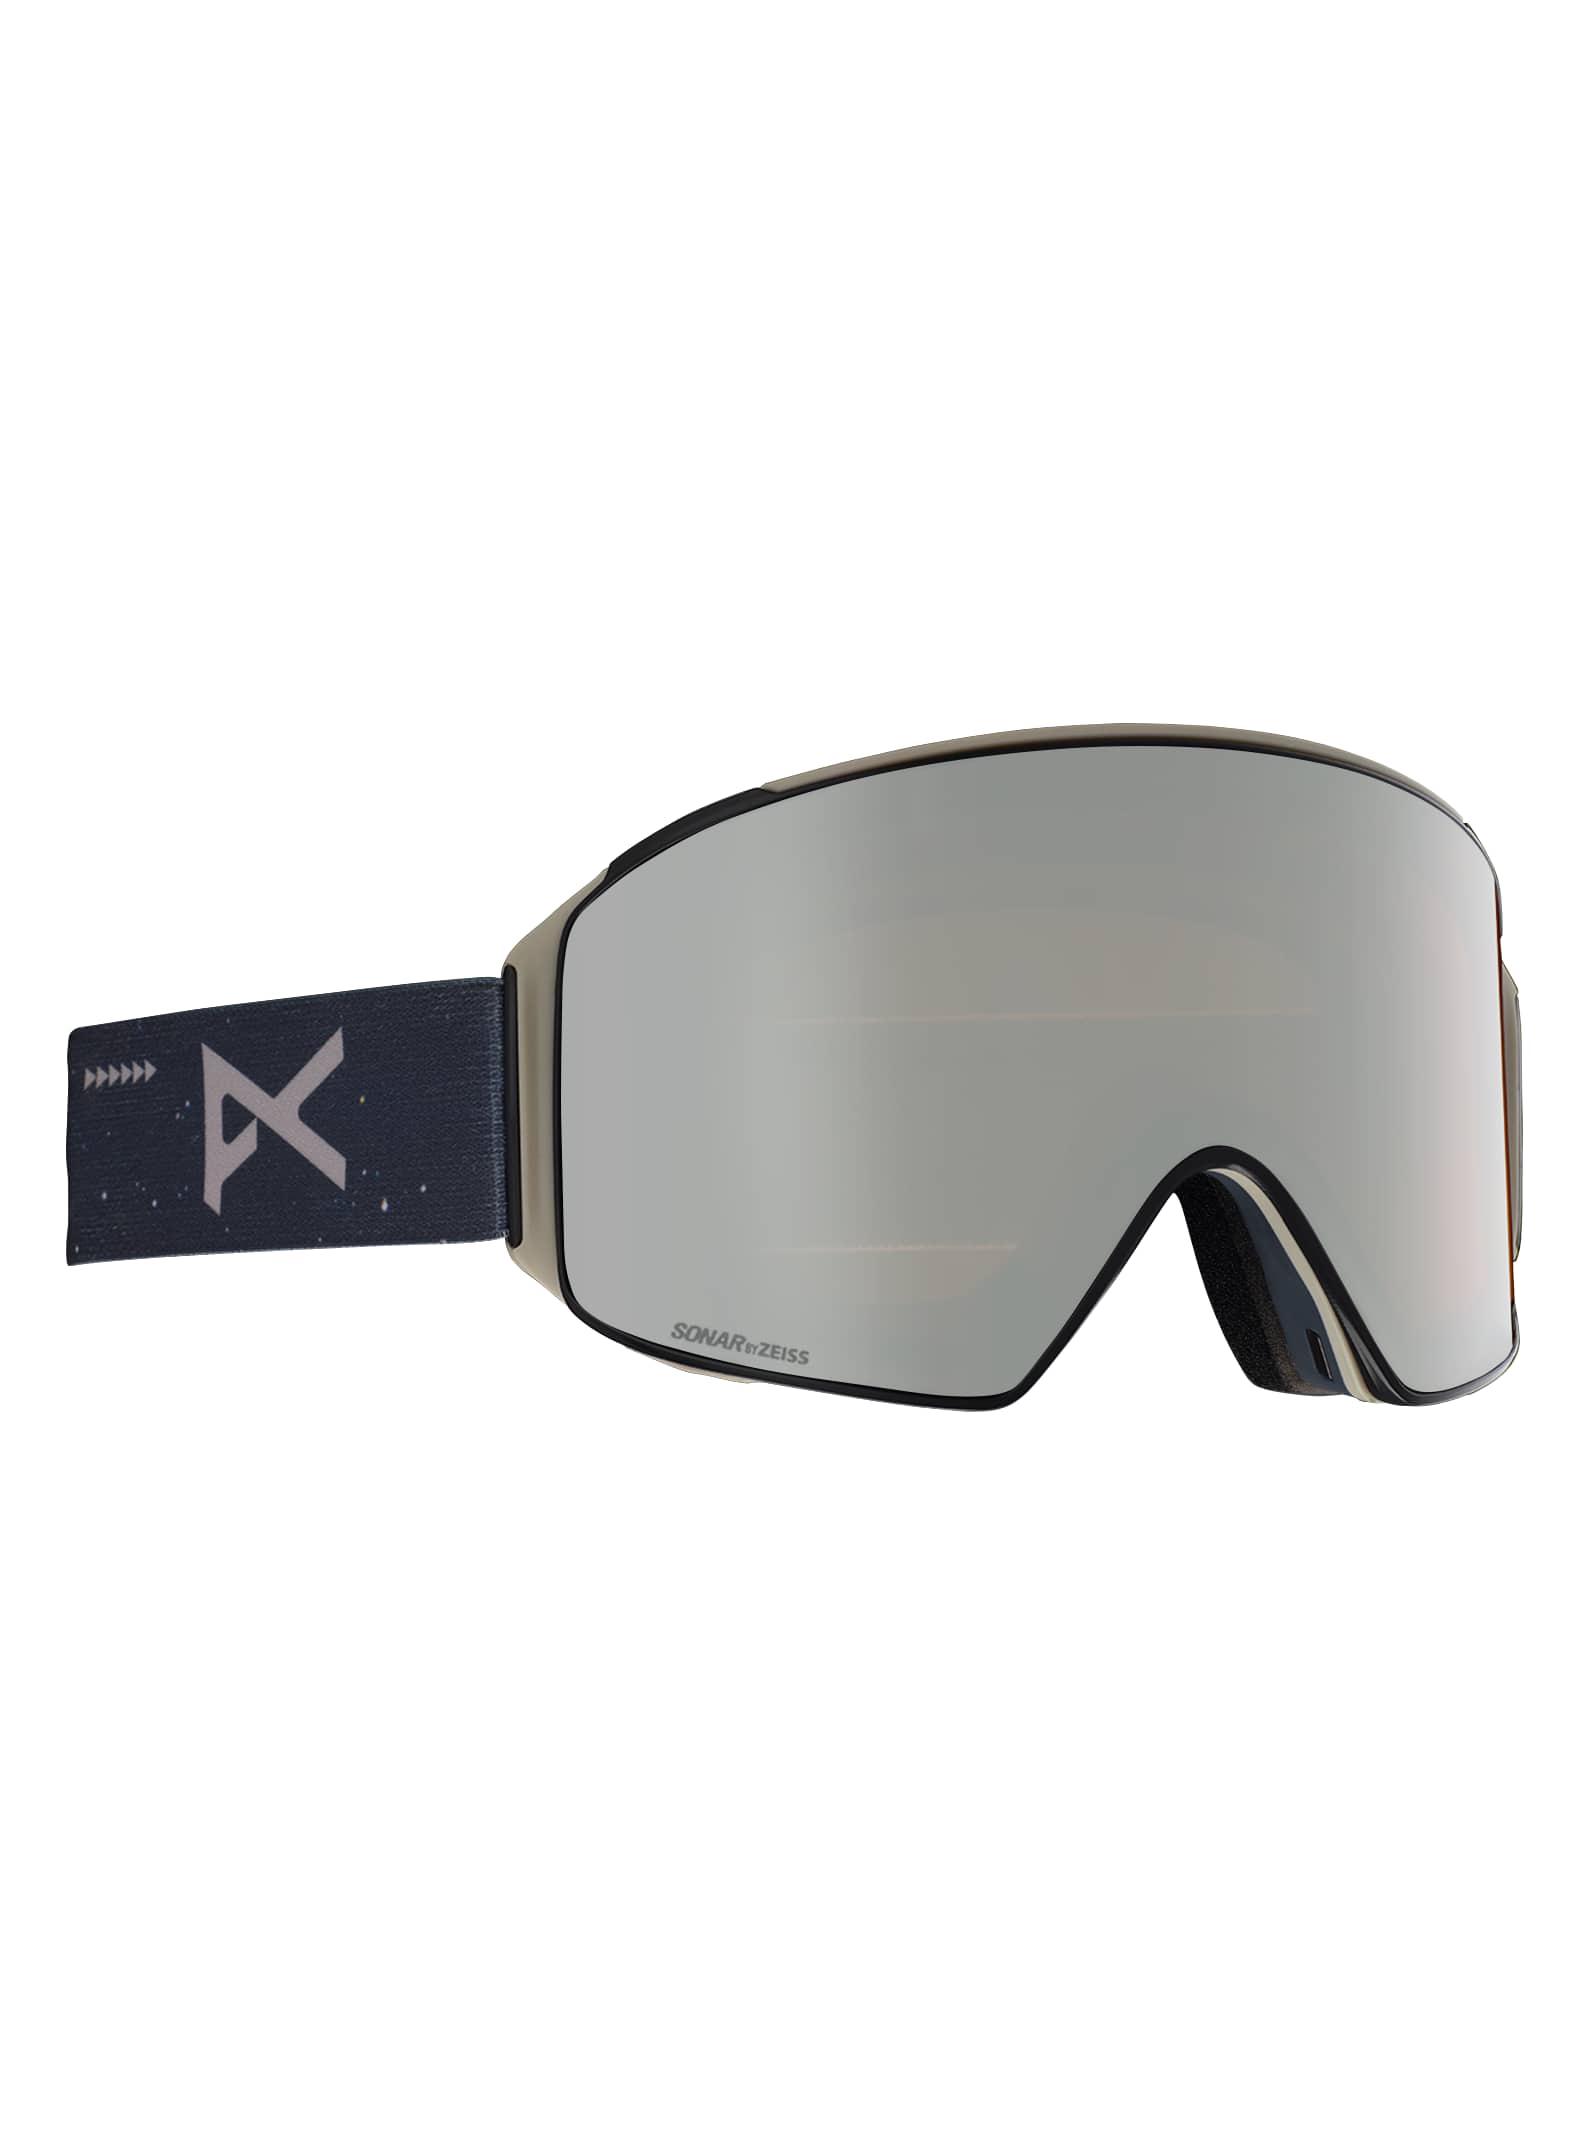 ANON MFI Hooded Clava Mens NEW Compatible ANON Mens MFI Frames